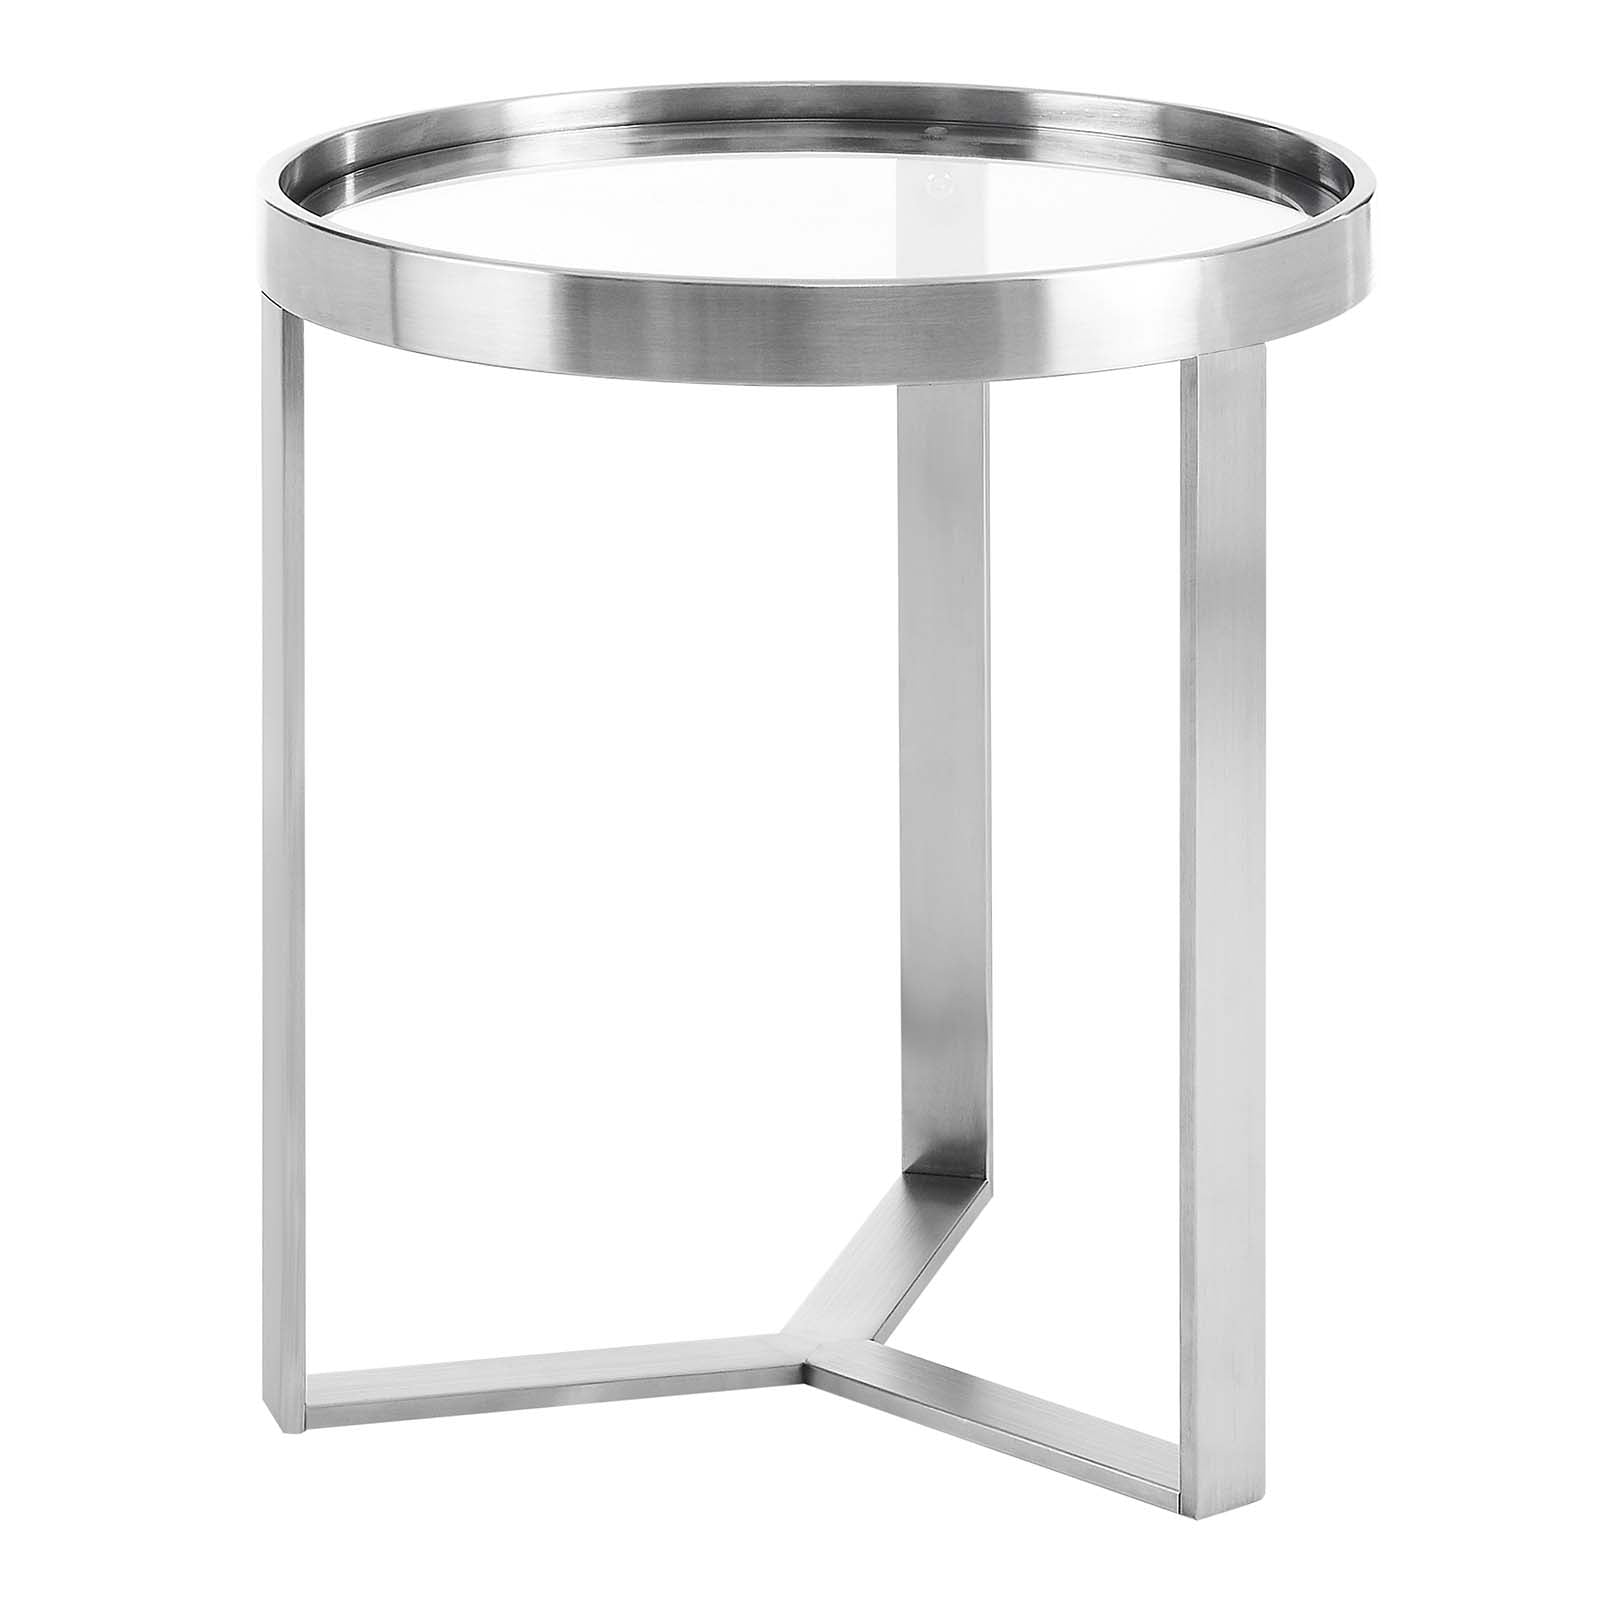 Relay 17.5" Side Table - East Shore Modern Home Furnishings